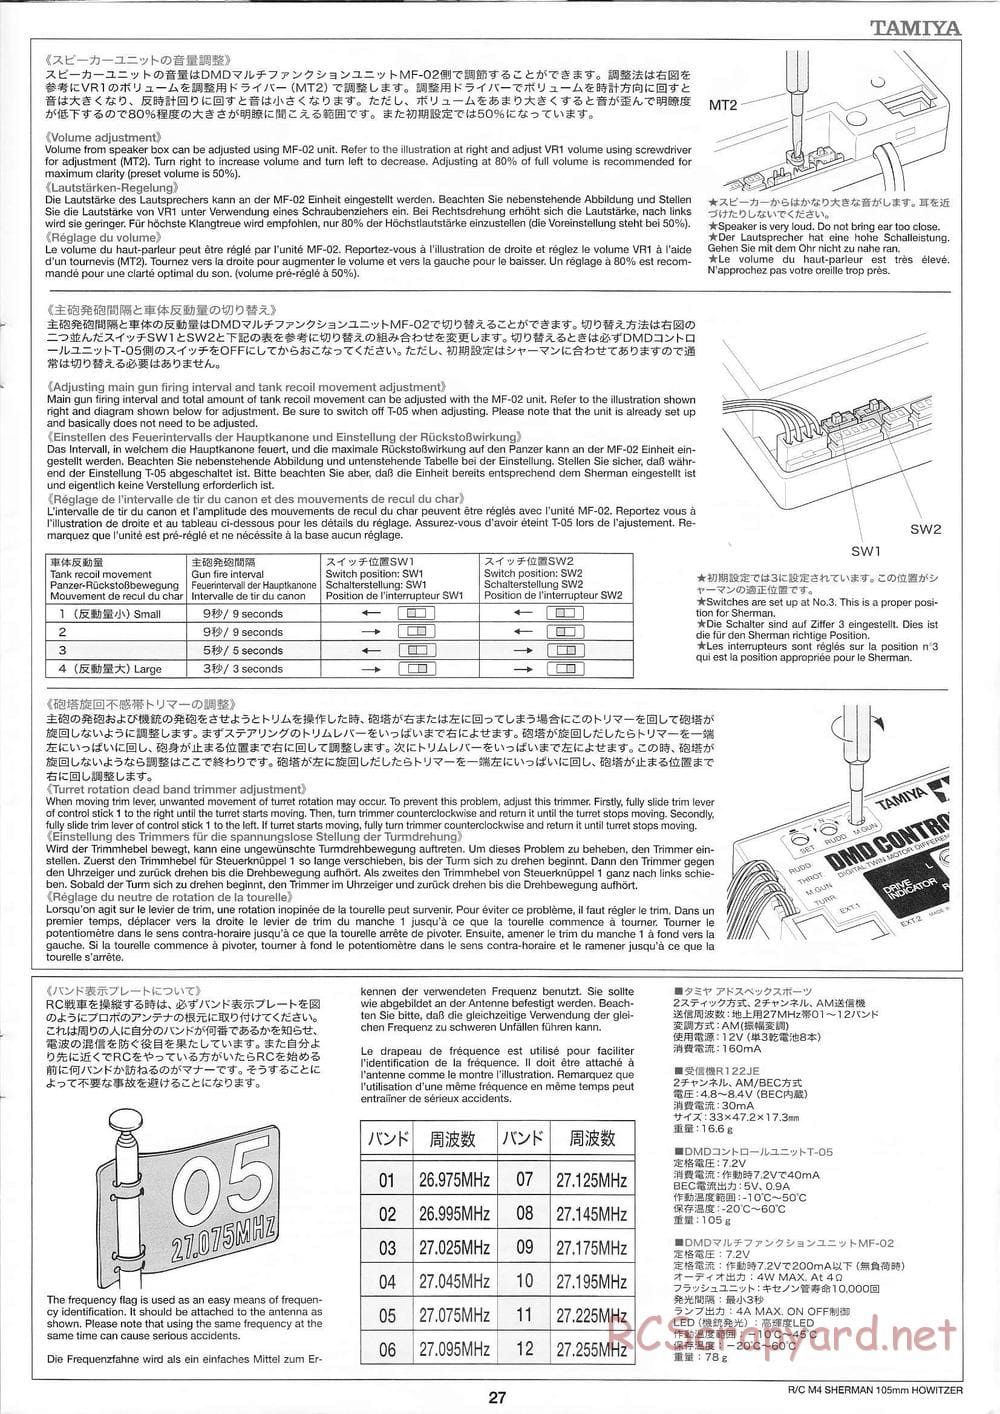 Tamiya - M4 Sherman 105mm Howitzer - 1/16 Scale Chassis - Manual - Page 28